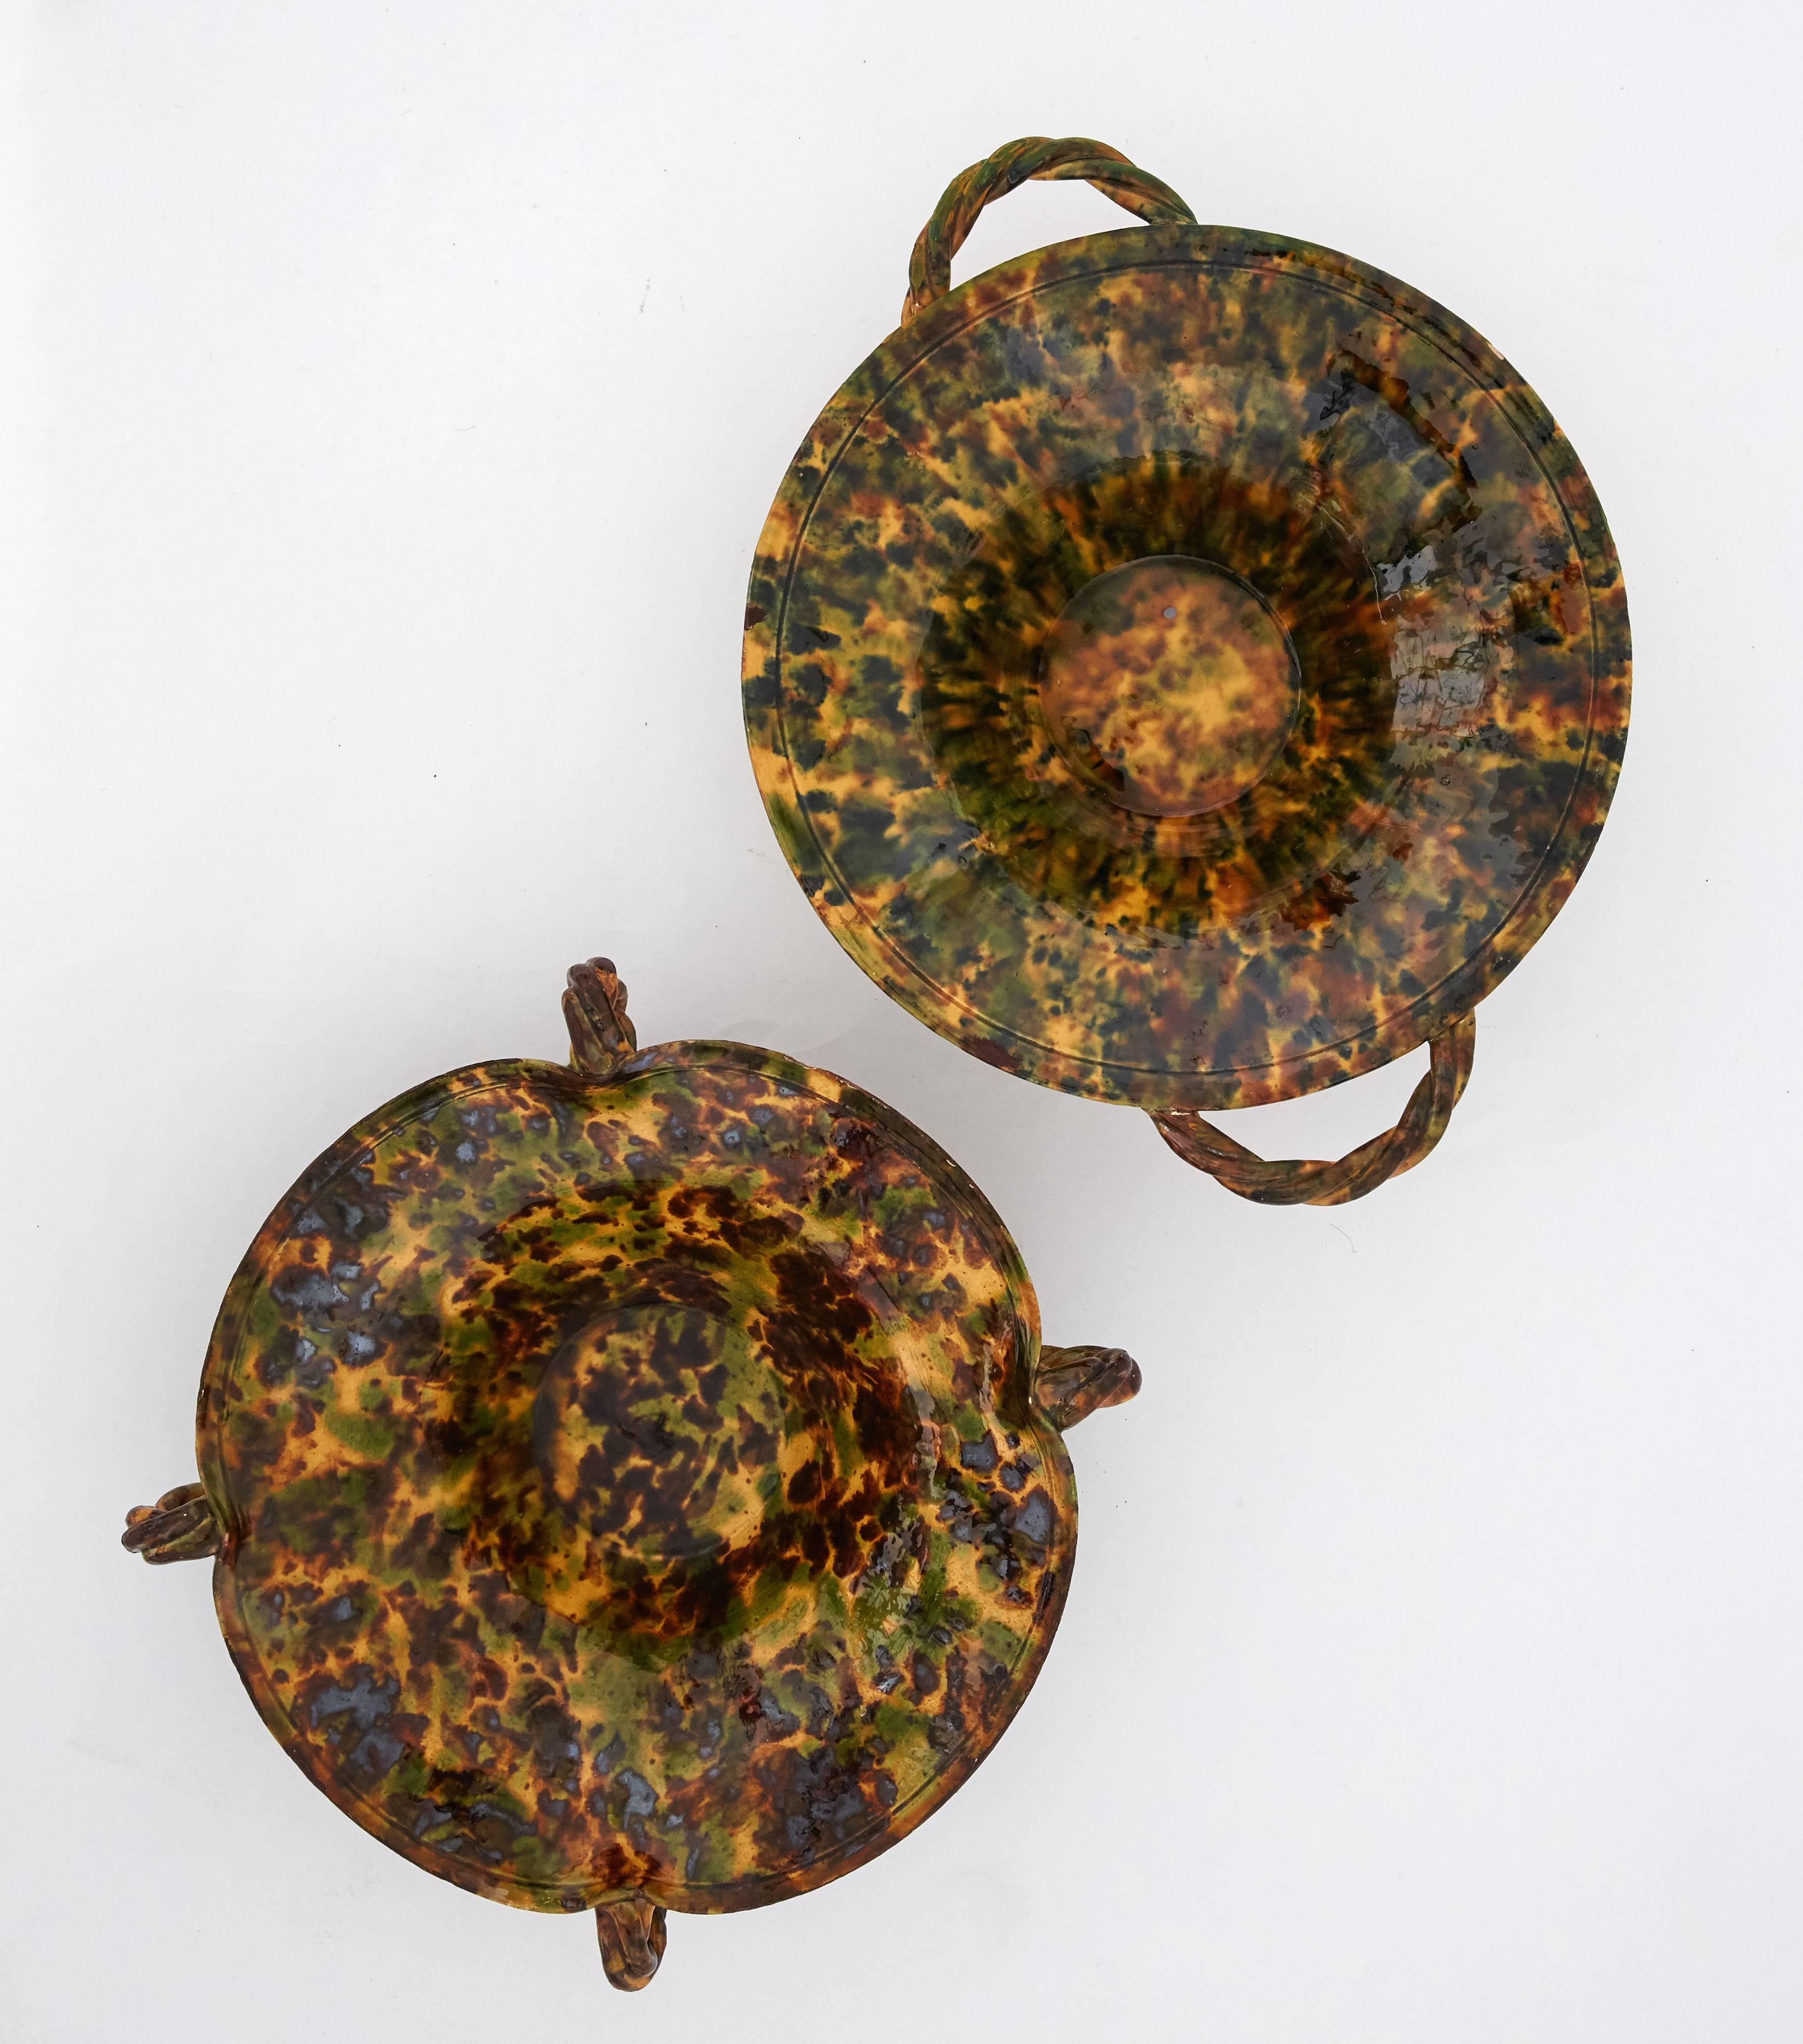 This pair of tortoise shell effect large ceramic bowls were made in France in the early 20th century. These beautiful large bowls are made in ceramic and embellished with a tortoise shell effect glaze. They were made in Provence in the early 1920s